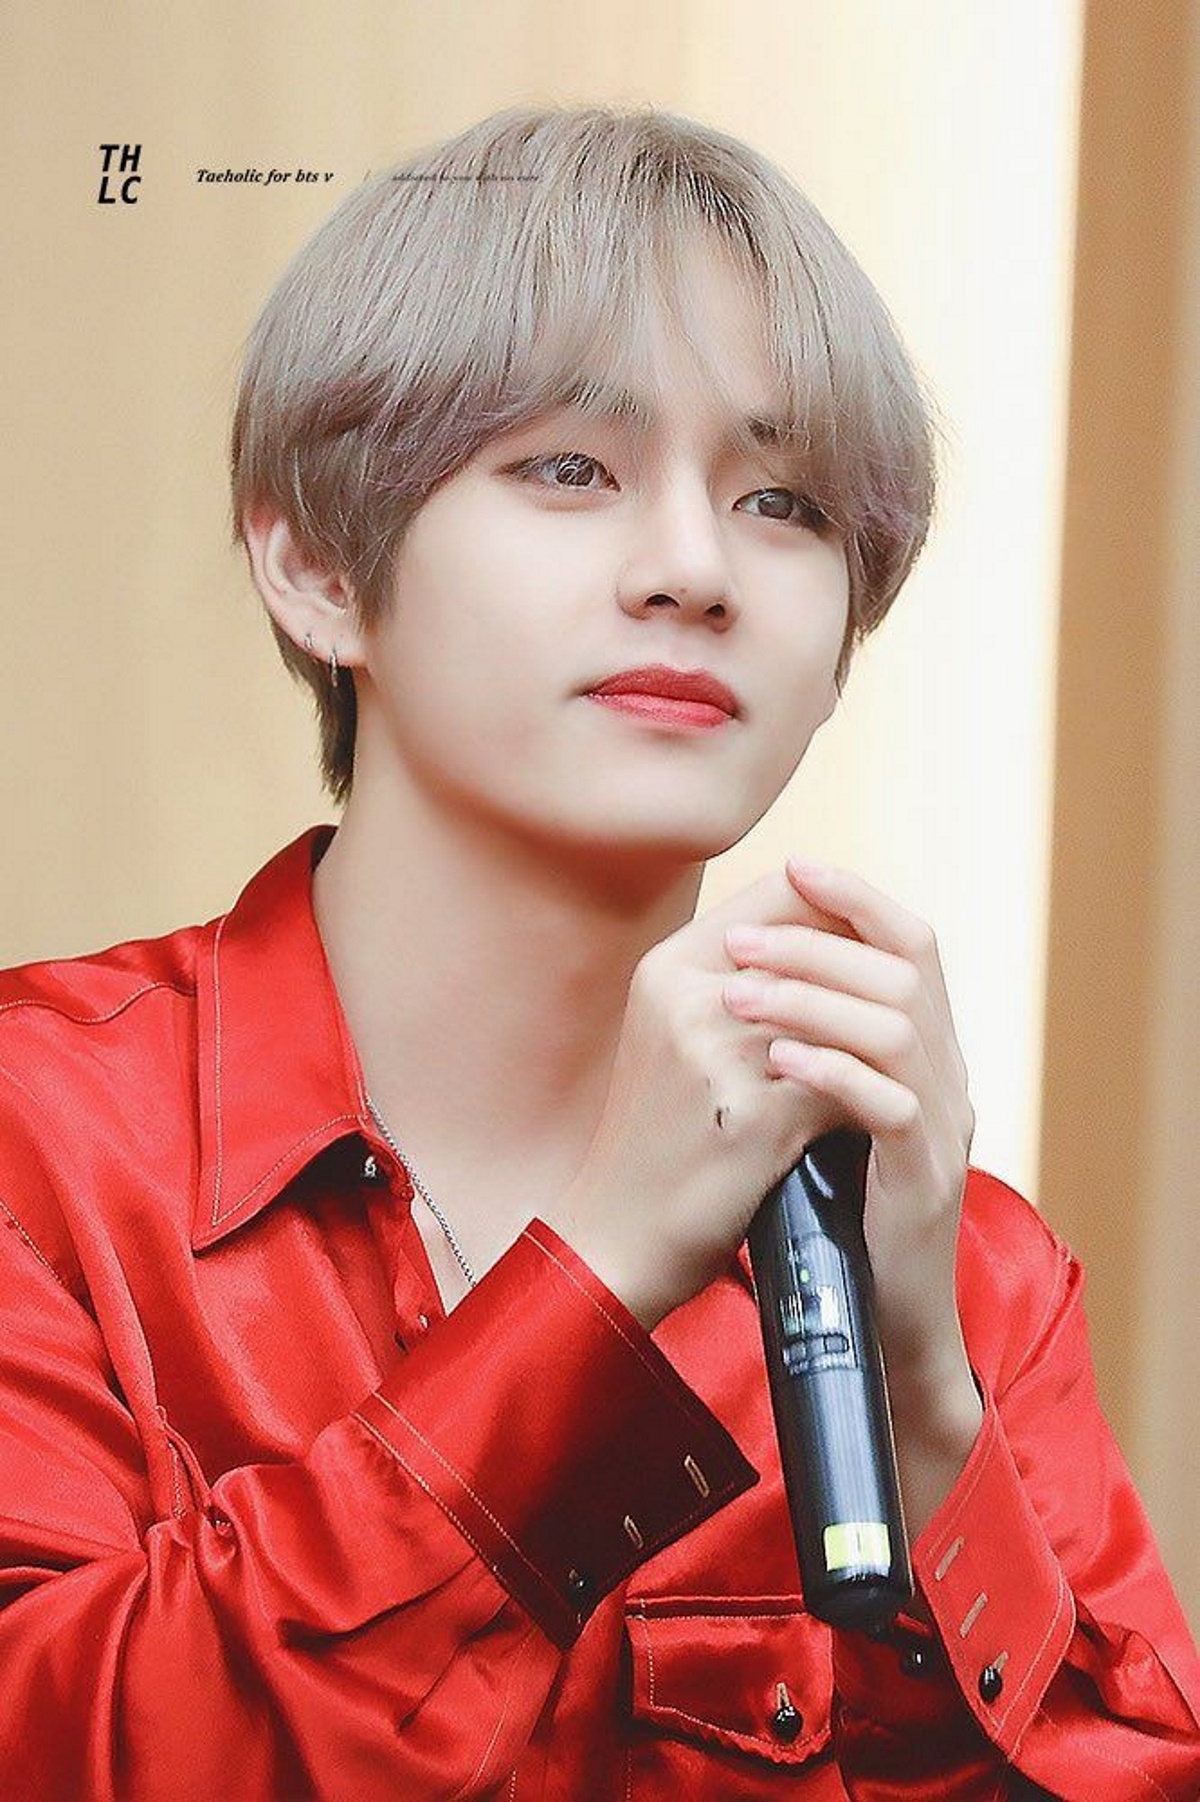 BTS' V aka Kim Taehyung's net worth, earnings, investments and more